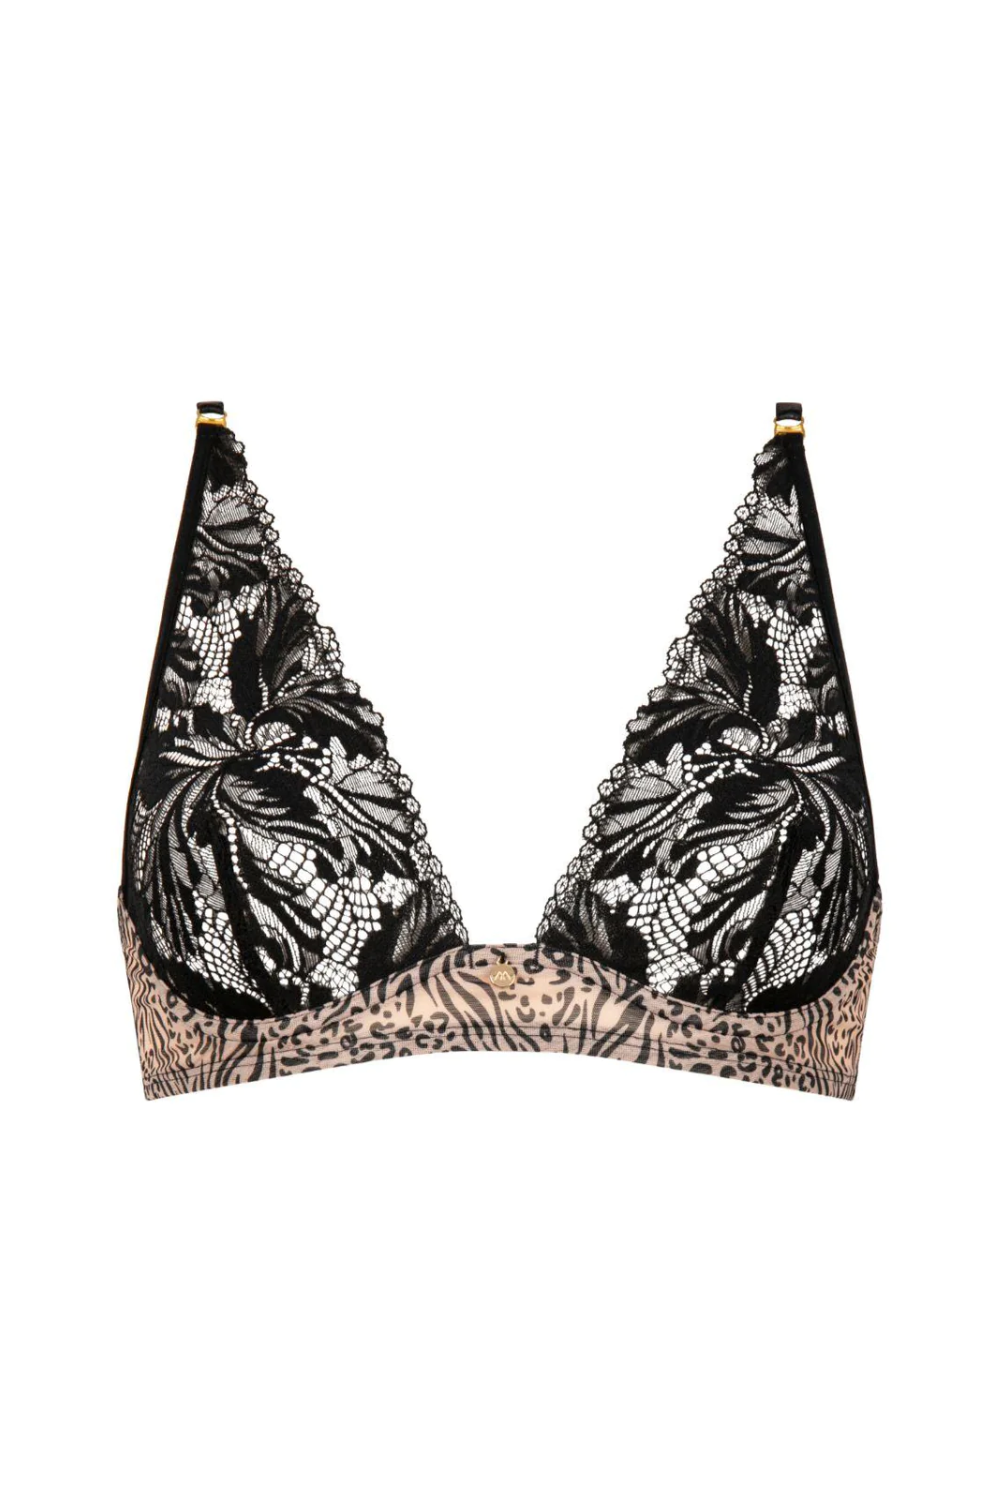 Caresse Féline Tropical Lace Animal Print Tulle Underwired Triangle Bra